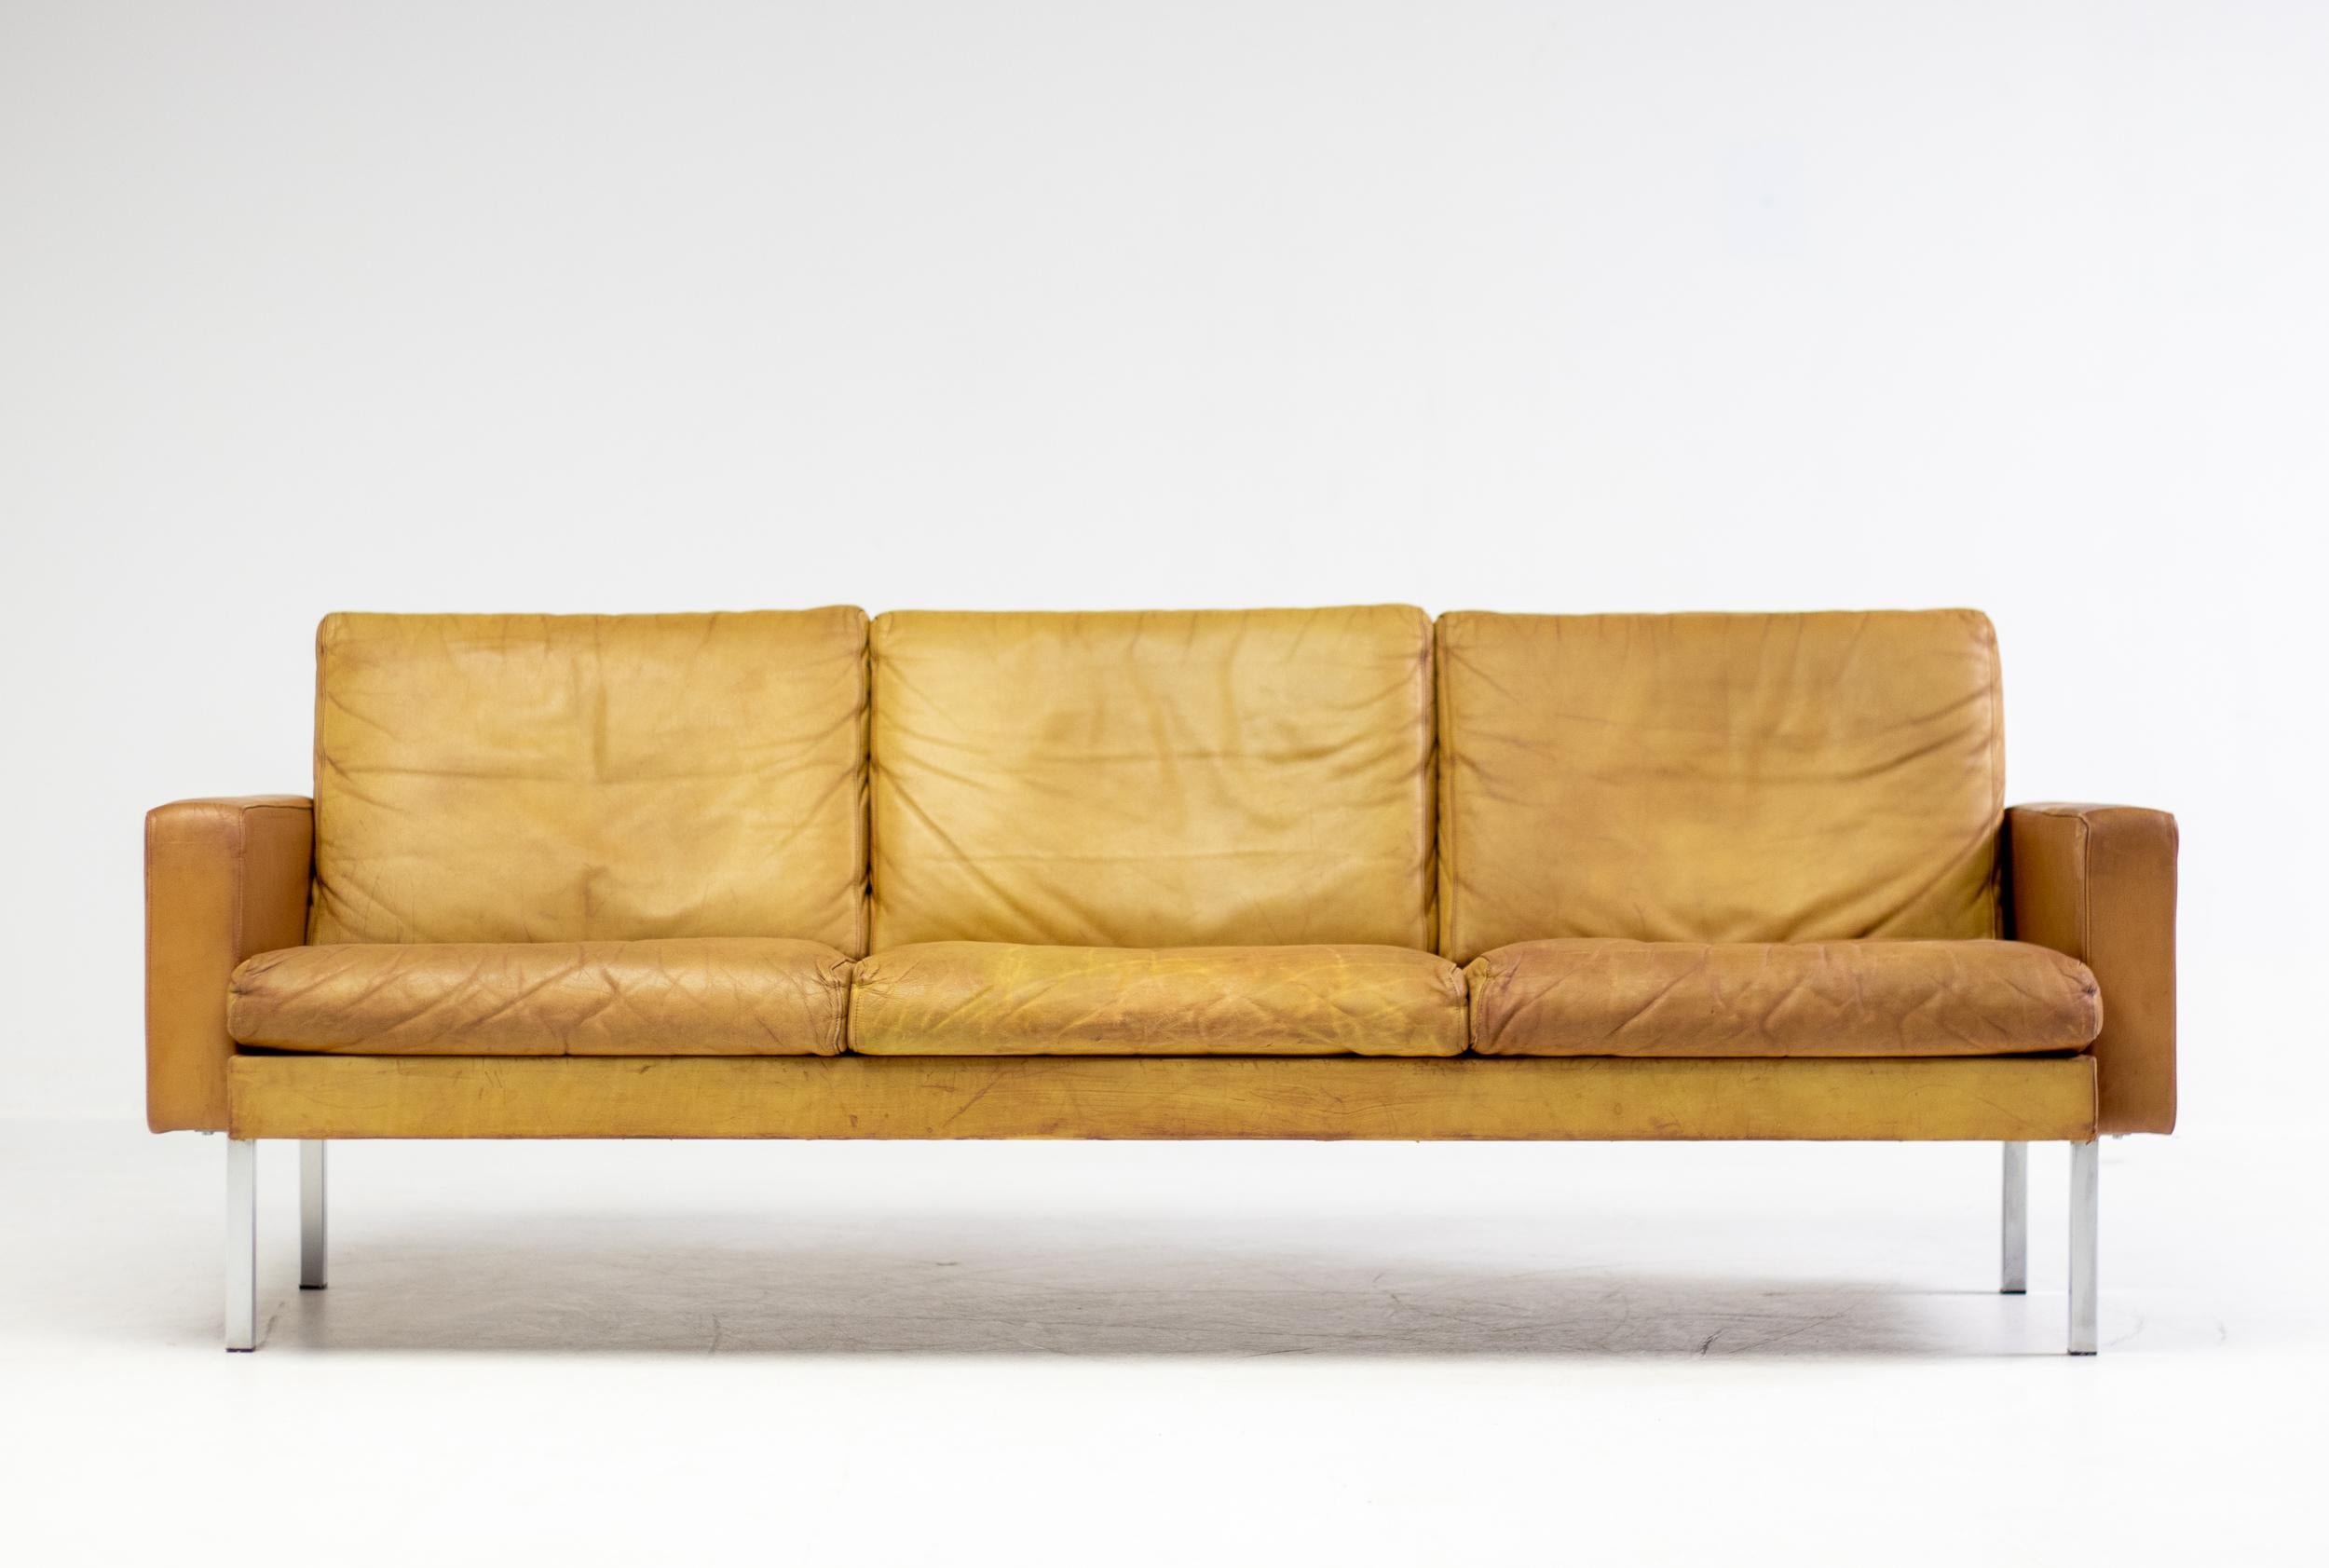 Very rare Martin Visser sofa BZ55 designed in 1968 for 't Spectrum. This model is pictured in the catalogue raisonné. A very modern design with comfortable down filled cushions. 
Florence Knoll and George Nelson designed similar strictly modern